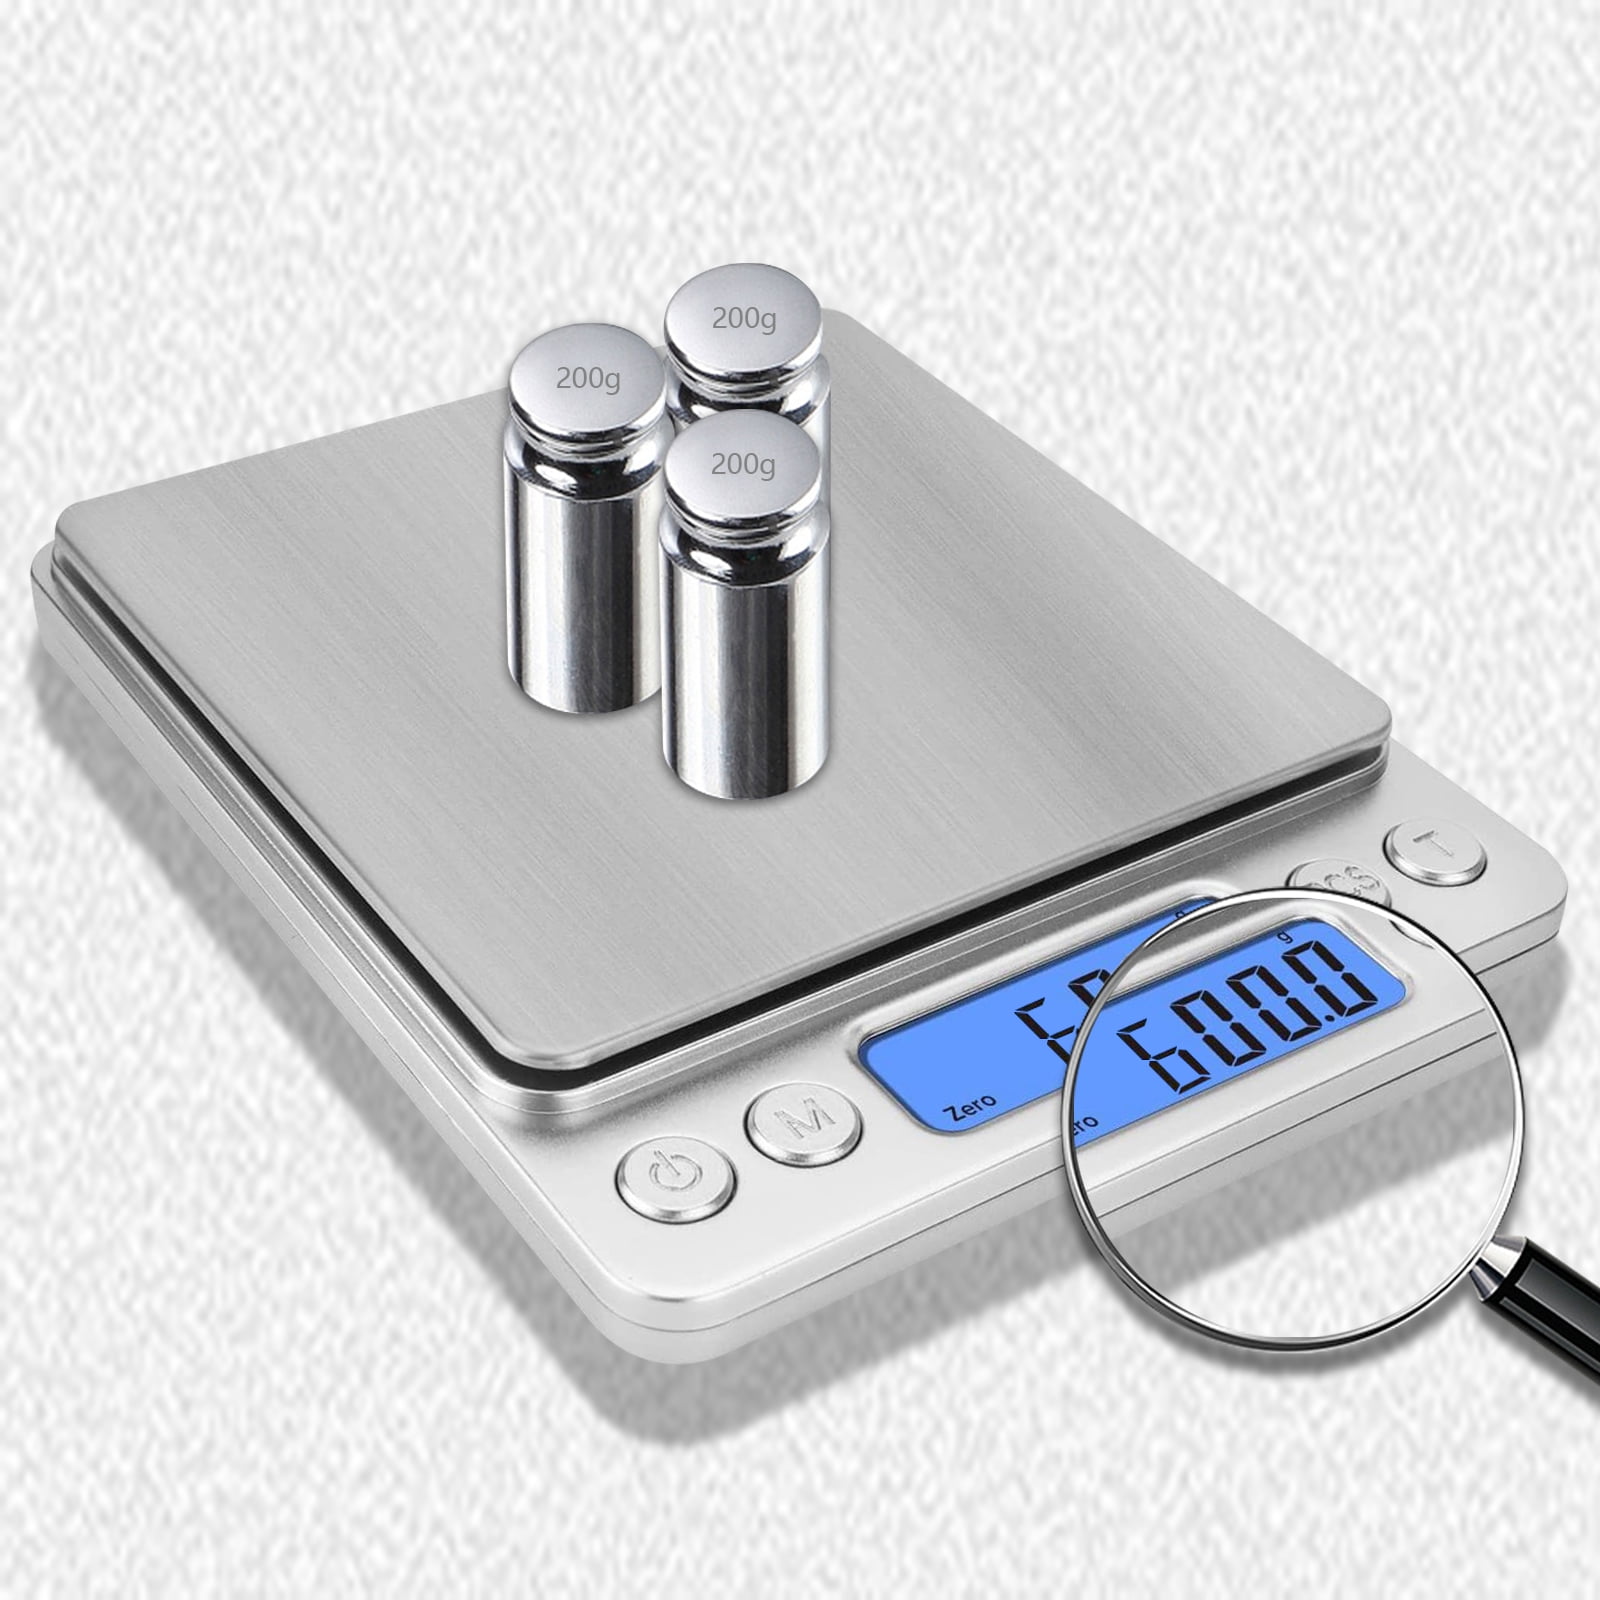 Gram Scale Digital Kitchen Scale Mini Pocket Pro Size 500g x 0.01g  Stainless Steel Platform for Cooking Baking Jewelry Weight